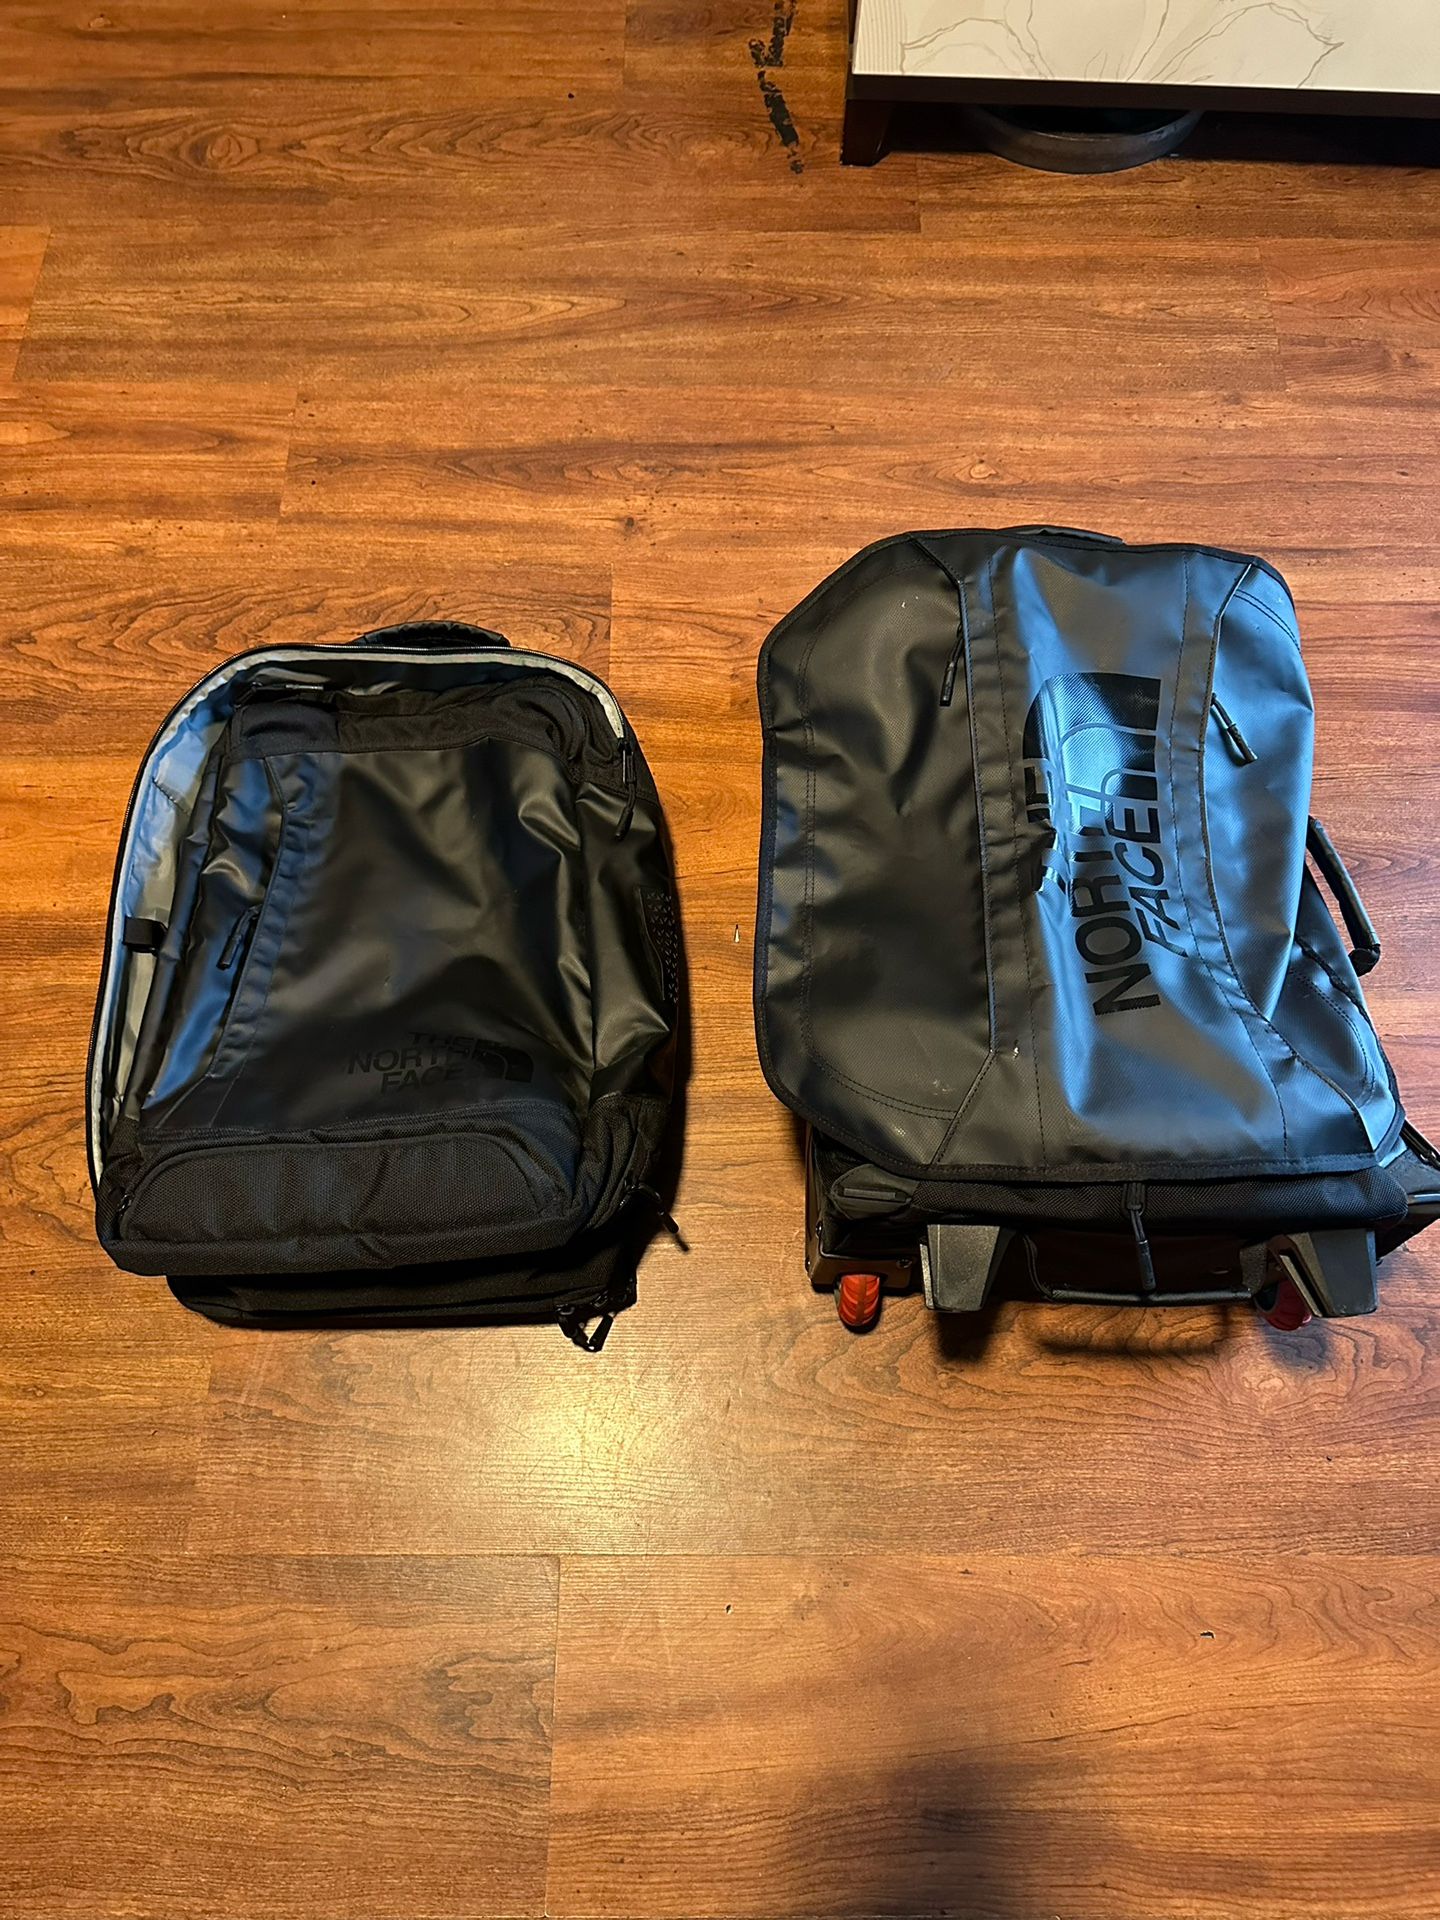 North Face Travel Backpack And Carry On